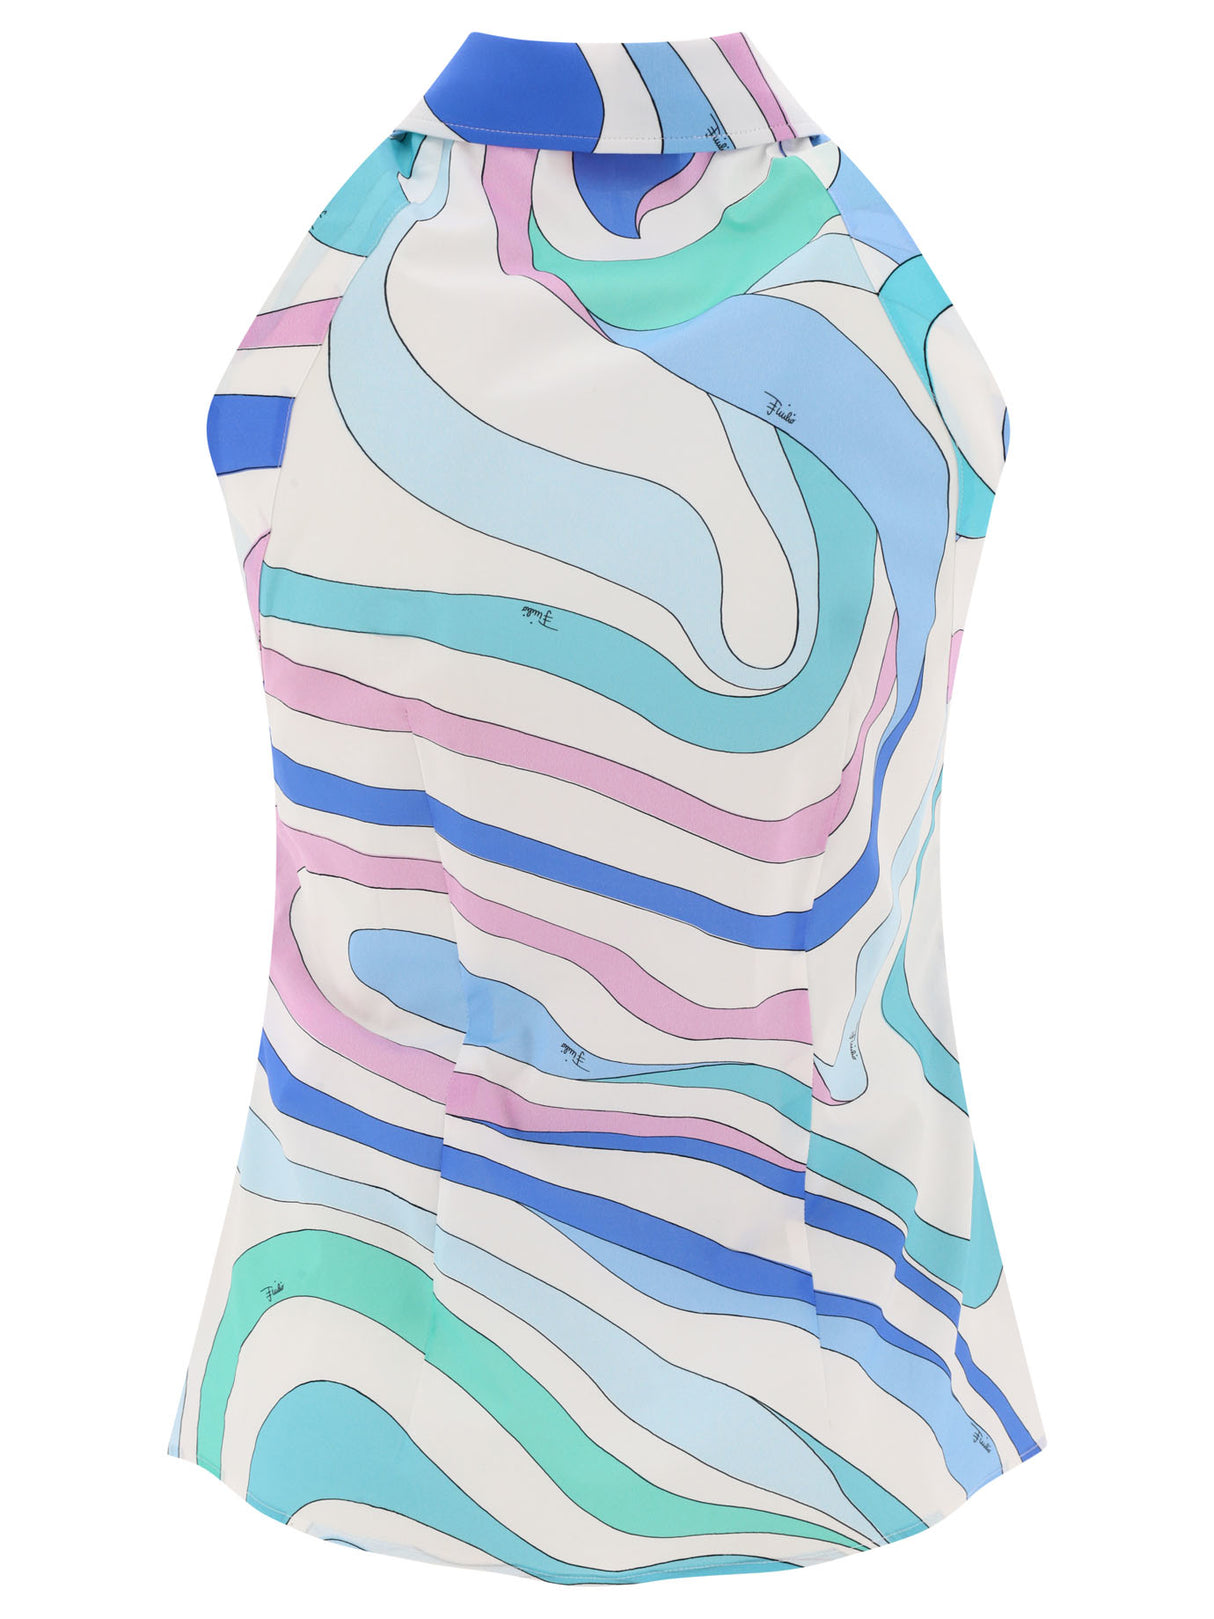 EMILIO PUCCI Light Blue Marmo-Print Top for Women - SS24 Collection